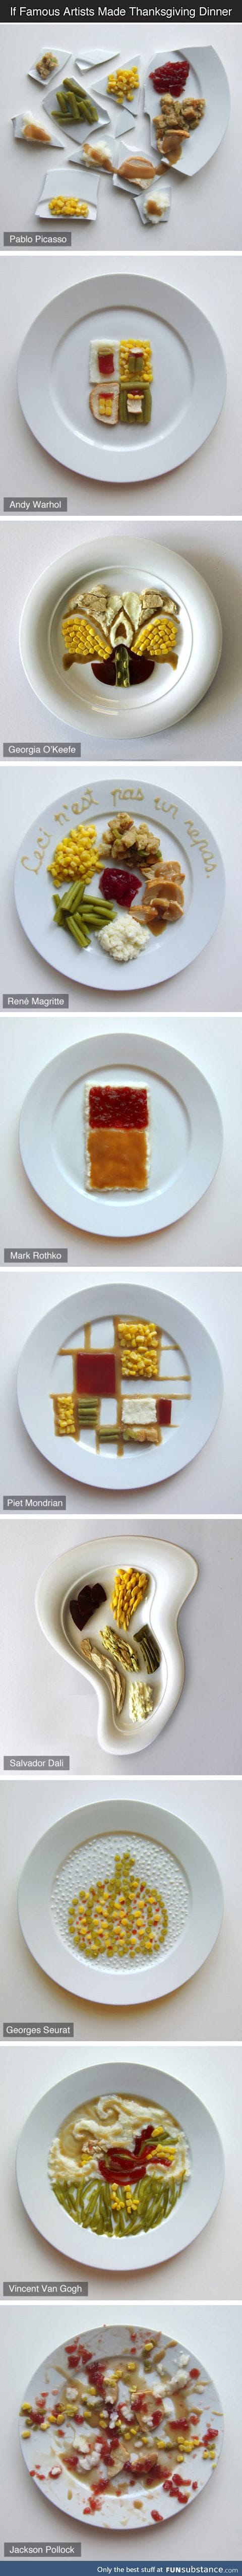 Thanksgiving dinner by famous artists